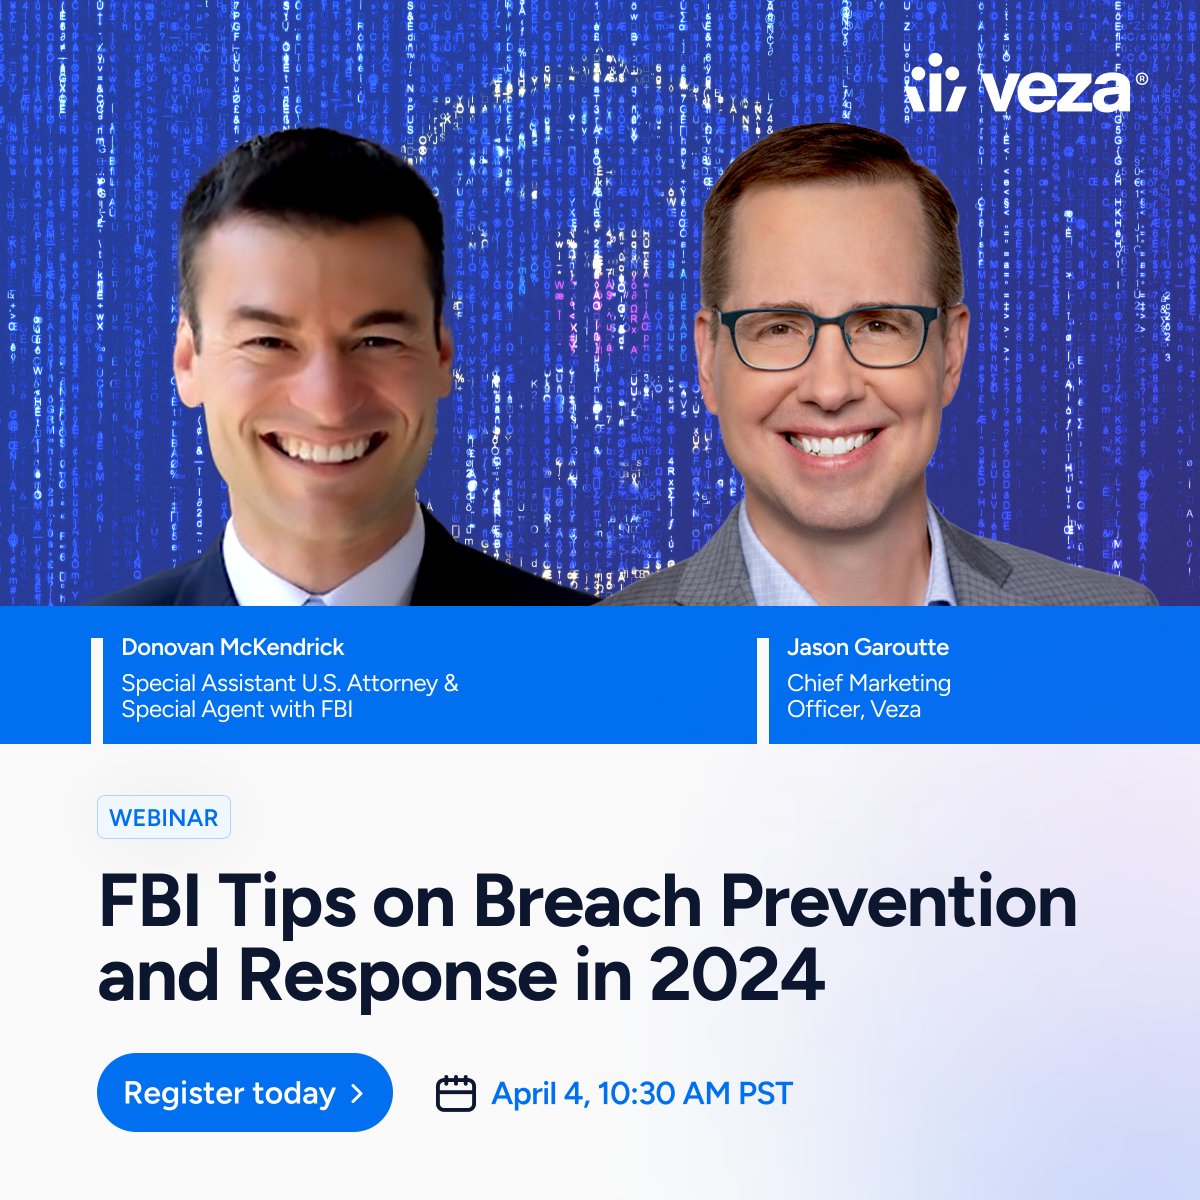 #FBI Tips for breach prevention 🛡️ Tune in on April 4th at 10:30am PT to hear FBI Agent and Special Assistant U.S. Attorney, Donovan McKendrick share strategies for navigating the 2024 threat landscape. ➡️ bit.ly/3PDLEVT #cloudsecurity #cybersecurity #identitysecurity